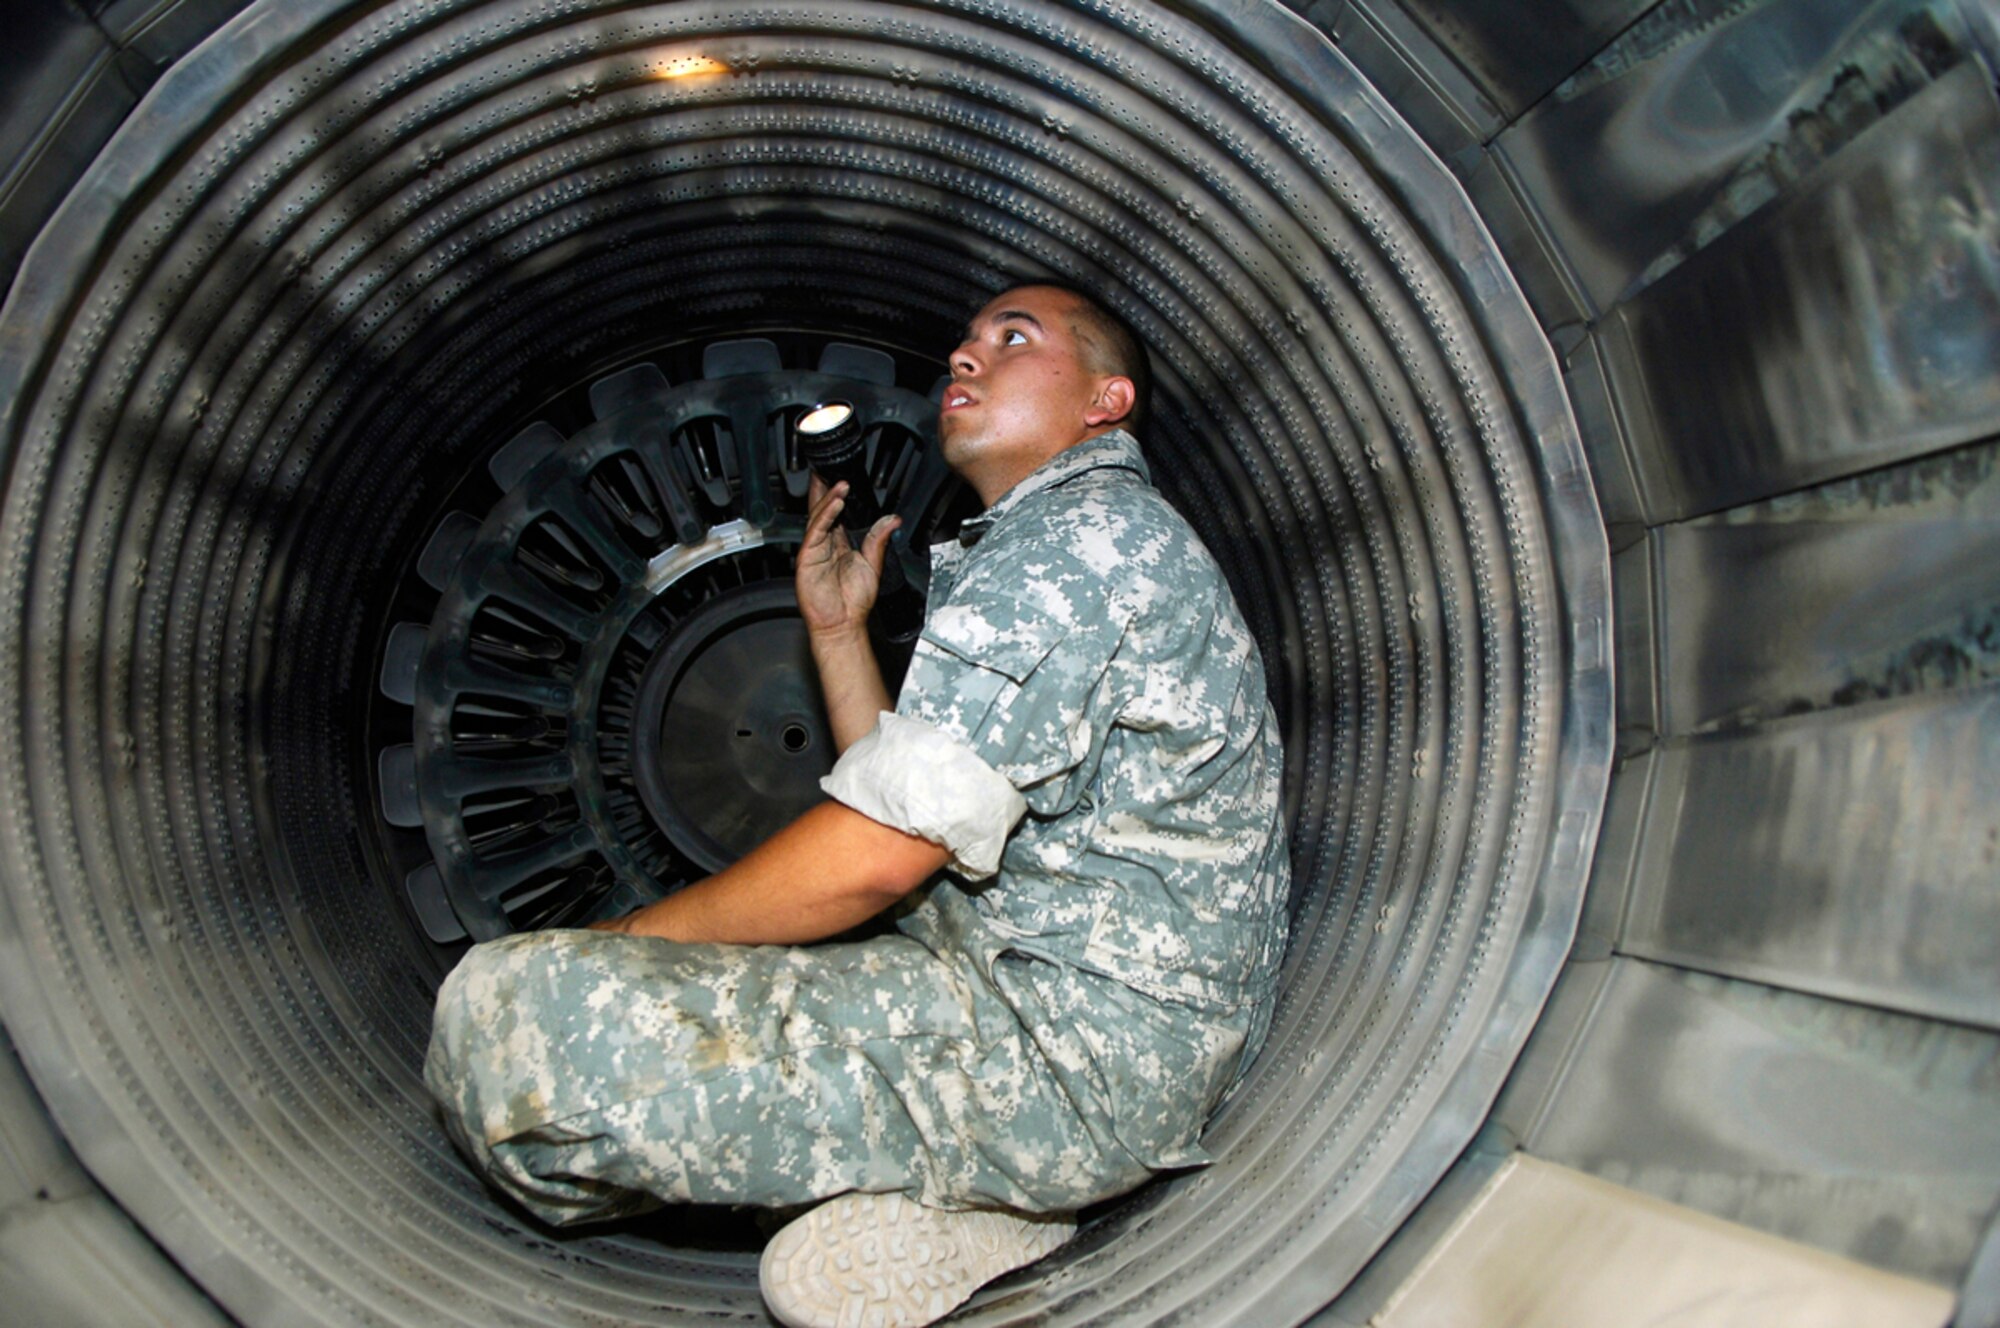 JOINT BASE BALAD, Iraq -- Senior Airman Andrew Molina, an engine mechanic assigned to the 332nd Expeditionary Maintenance Squadron Tiger Aircraft Maintenance Unit, inspects the liner of an augmenter -- commonly known as an afterburner -- for missing coating and rivets here July 7. Each jet assigned to the unit must be inspected daily to ensure it's mission-ready at all times. Airman Molina is deployed from the New York Air National Guard. (U.S. Air Force photo/Staff Sgt. Mareshah Haynes)